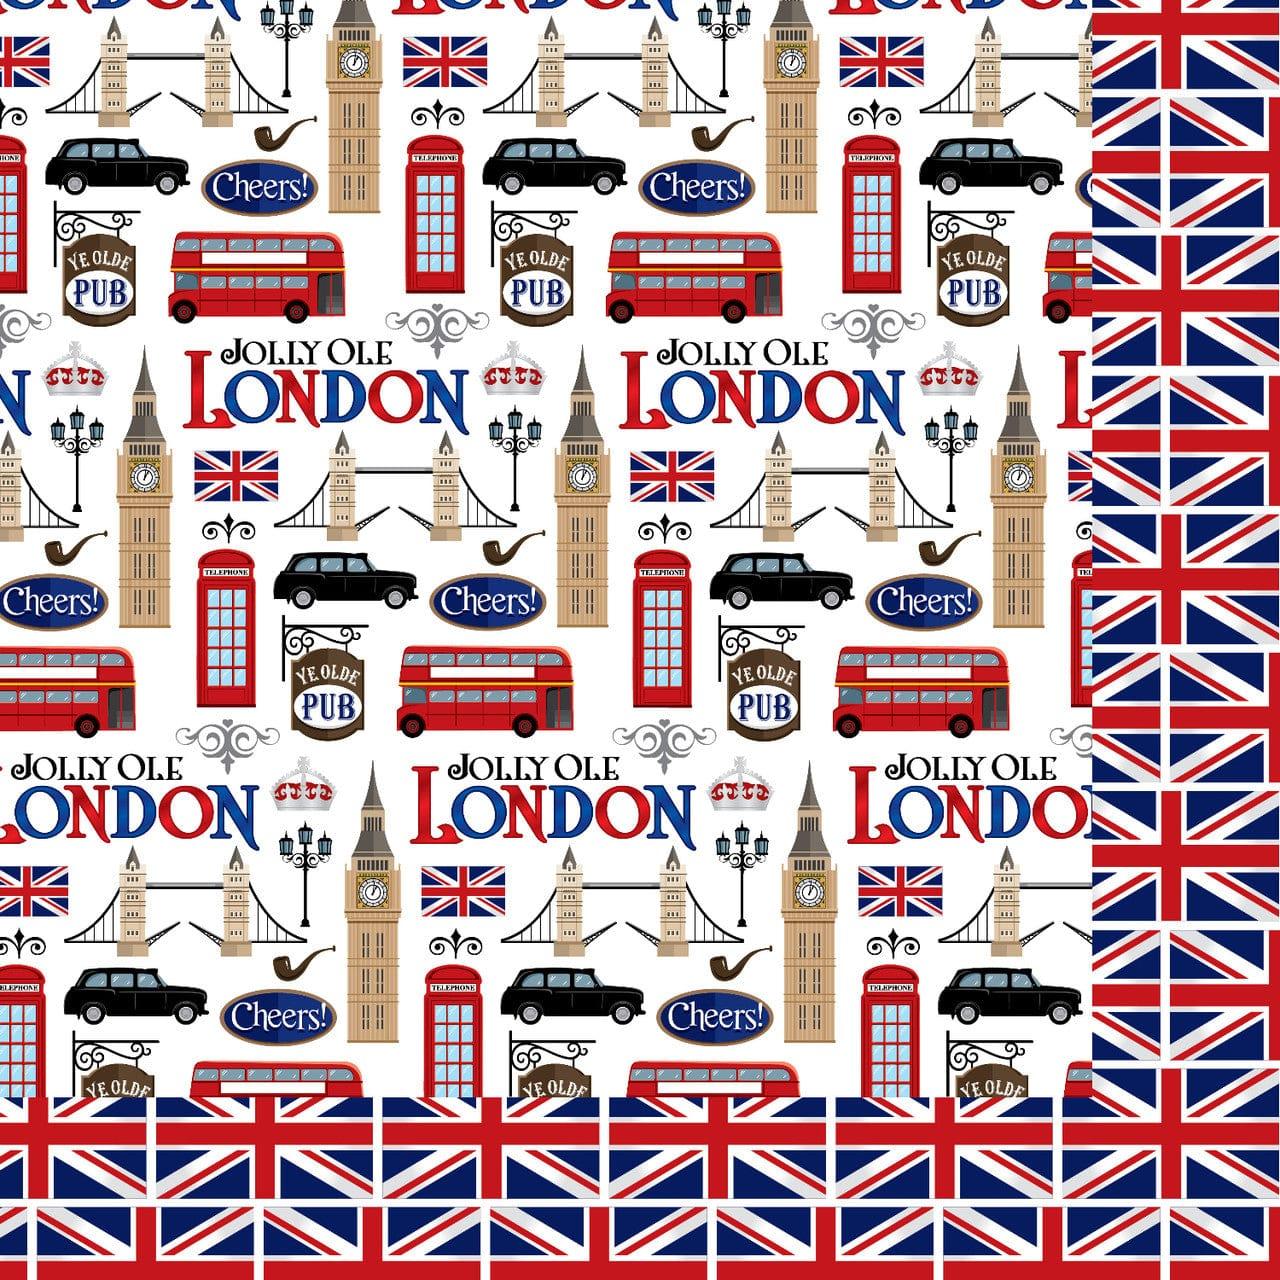  Jolly Ole London Collection London Icons 12 x 12 Double-Sided Scrapbook Paper by SSC Designs - Scrapbook Supply Companies